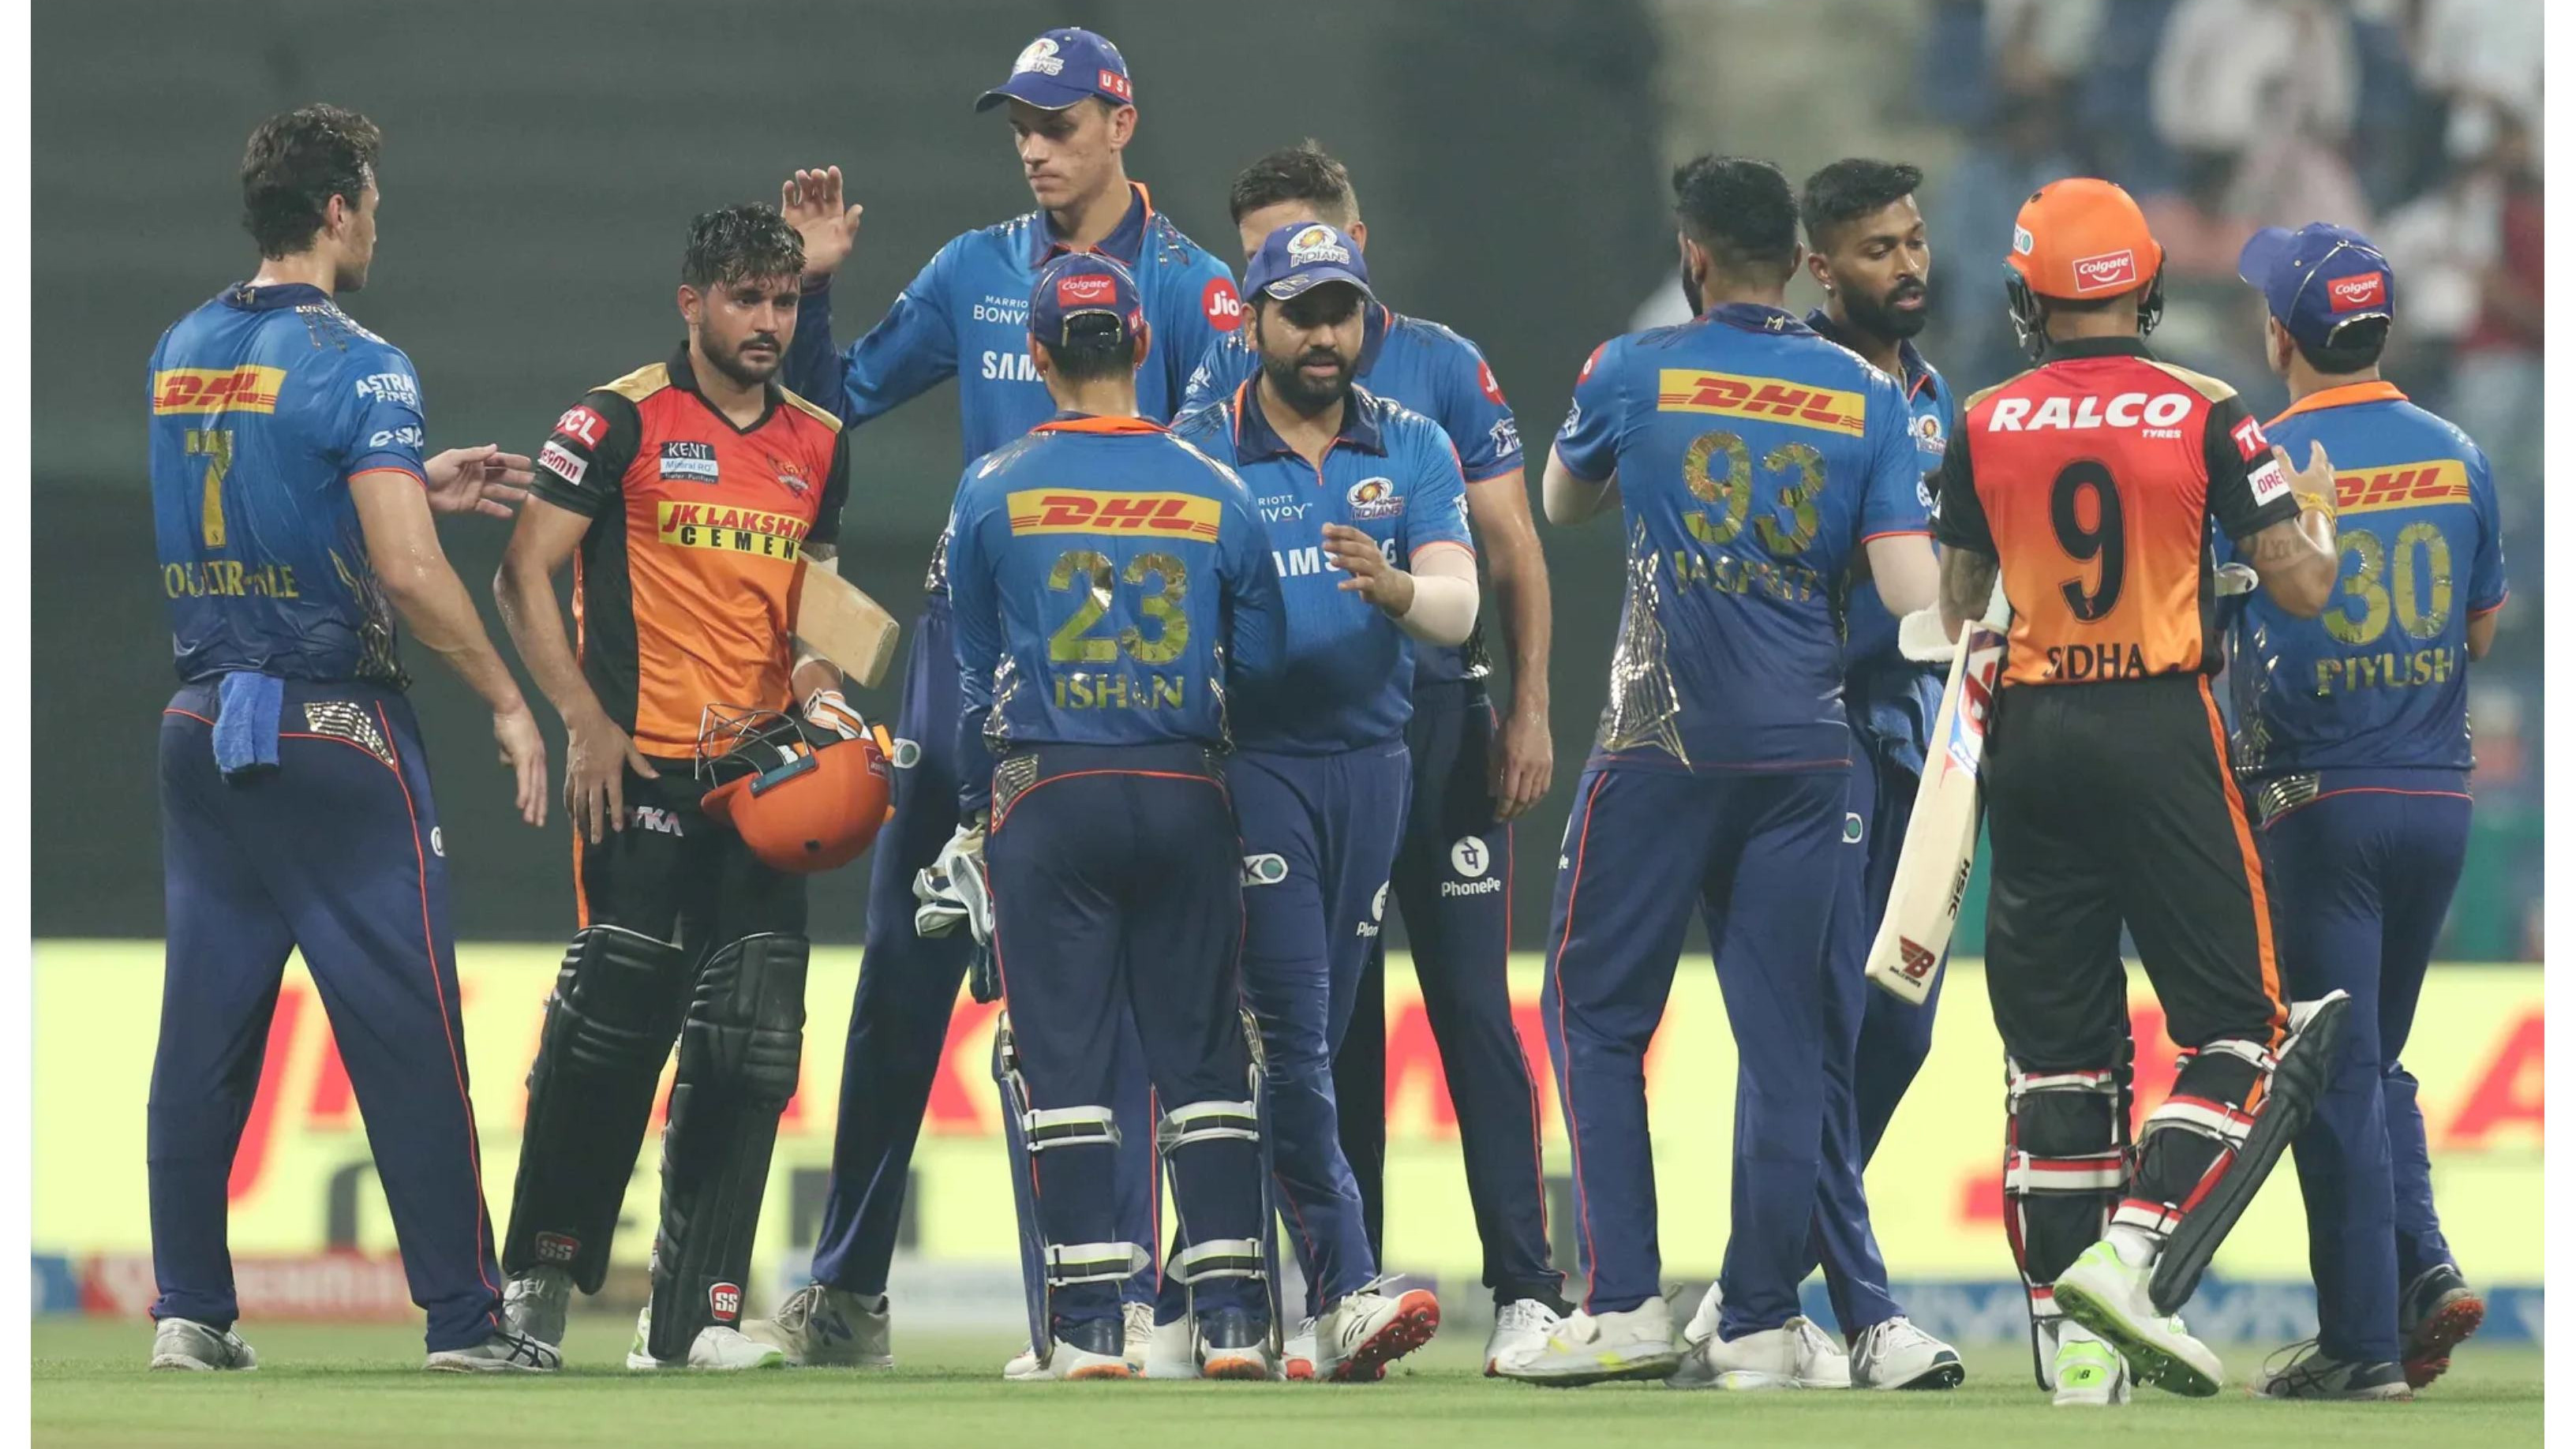 IPL 2021: ‘There was a collective failure as a group’, Rohit Sharma weighs in on MI’s dismal campaign in UAE-leg